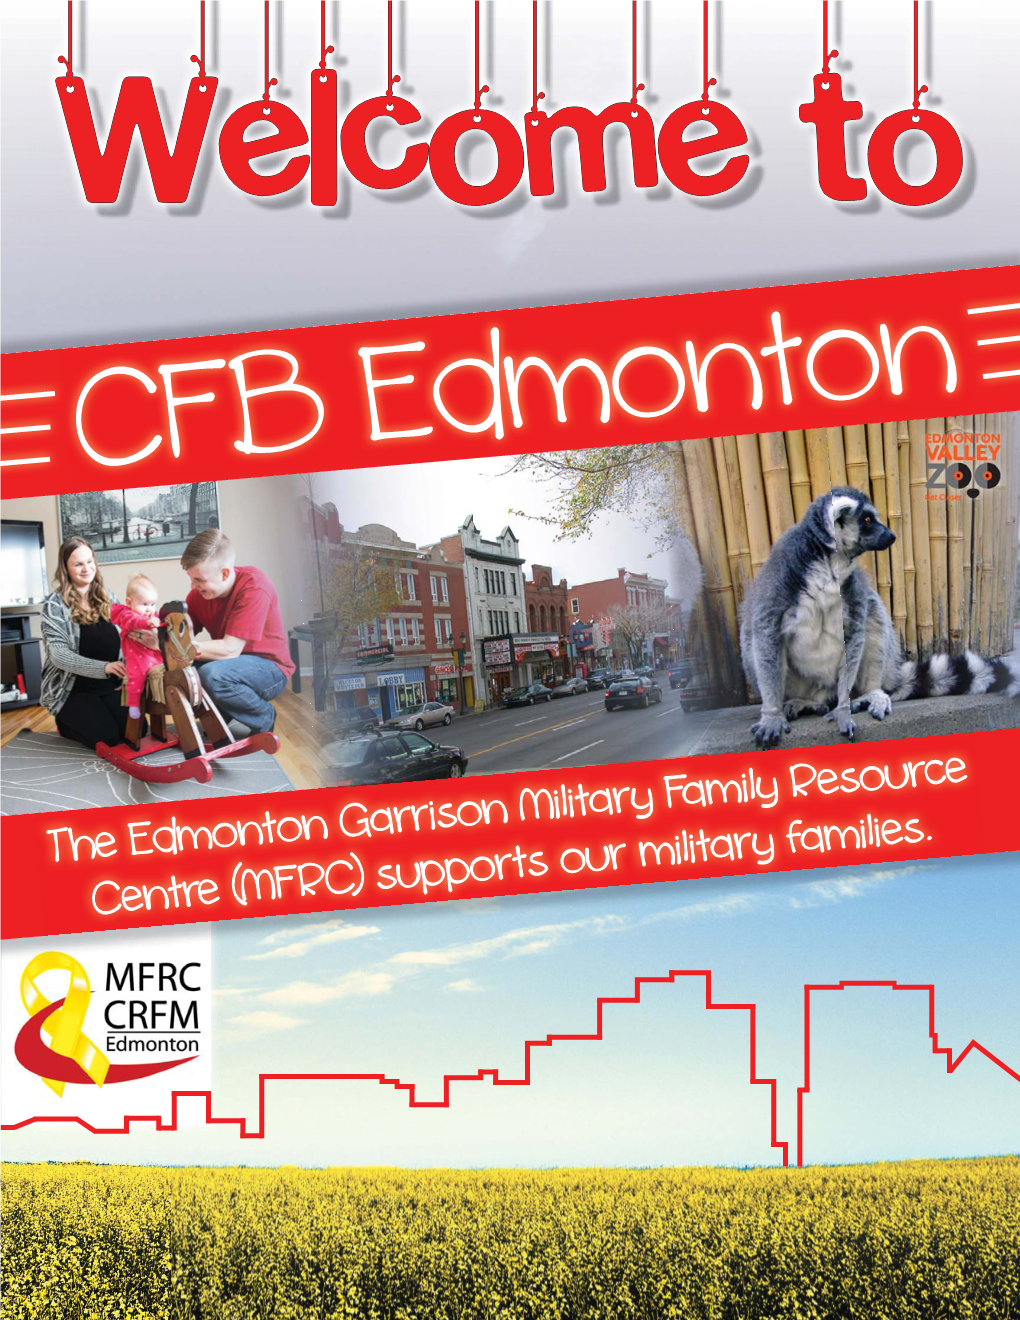 The Edmonton Garrison Military Family Resource Centre (MFRC), I Would Like to Take This Opportunity to Offi Cially Welcome You to Your New Home